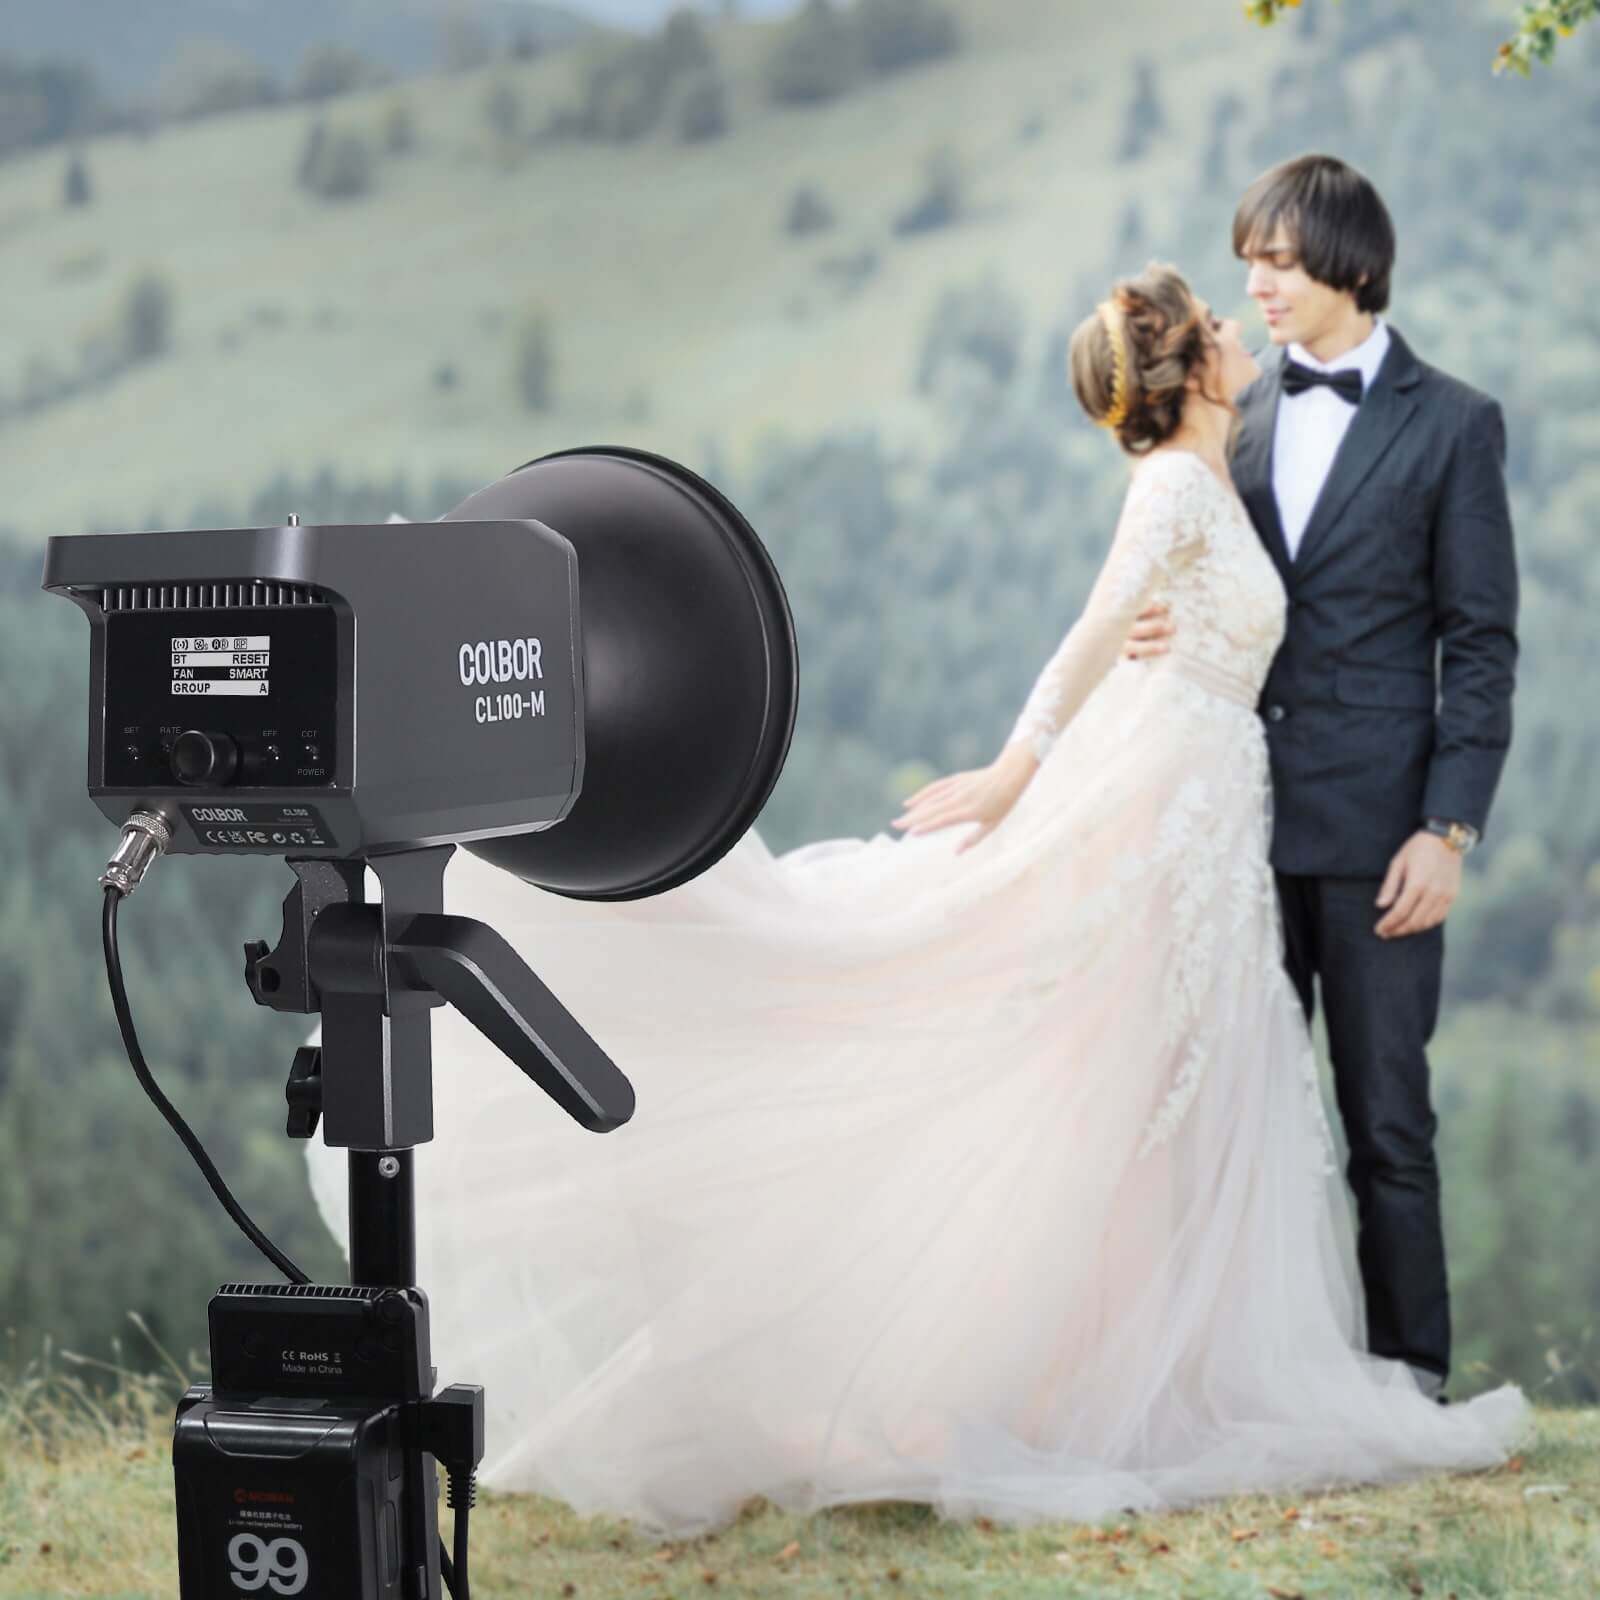 Daylight LED light COLBOR CL100M with smooth light and various lighting effects can be used for wedding photos shooting